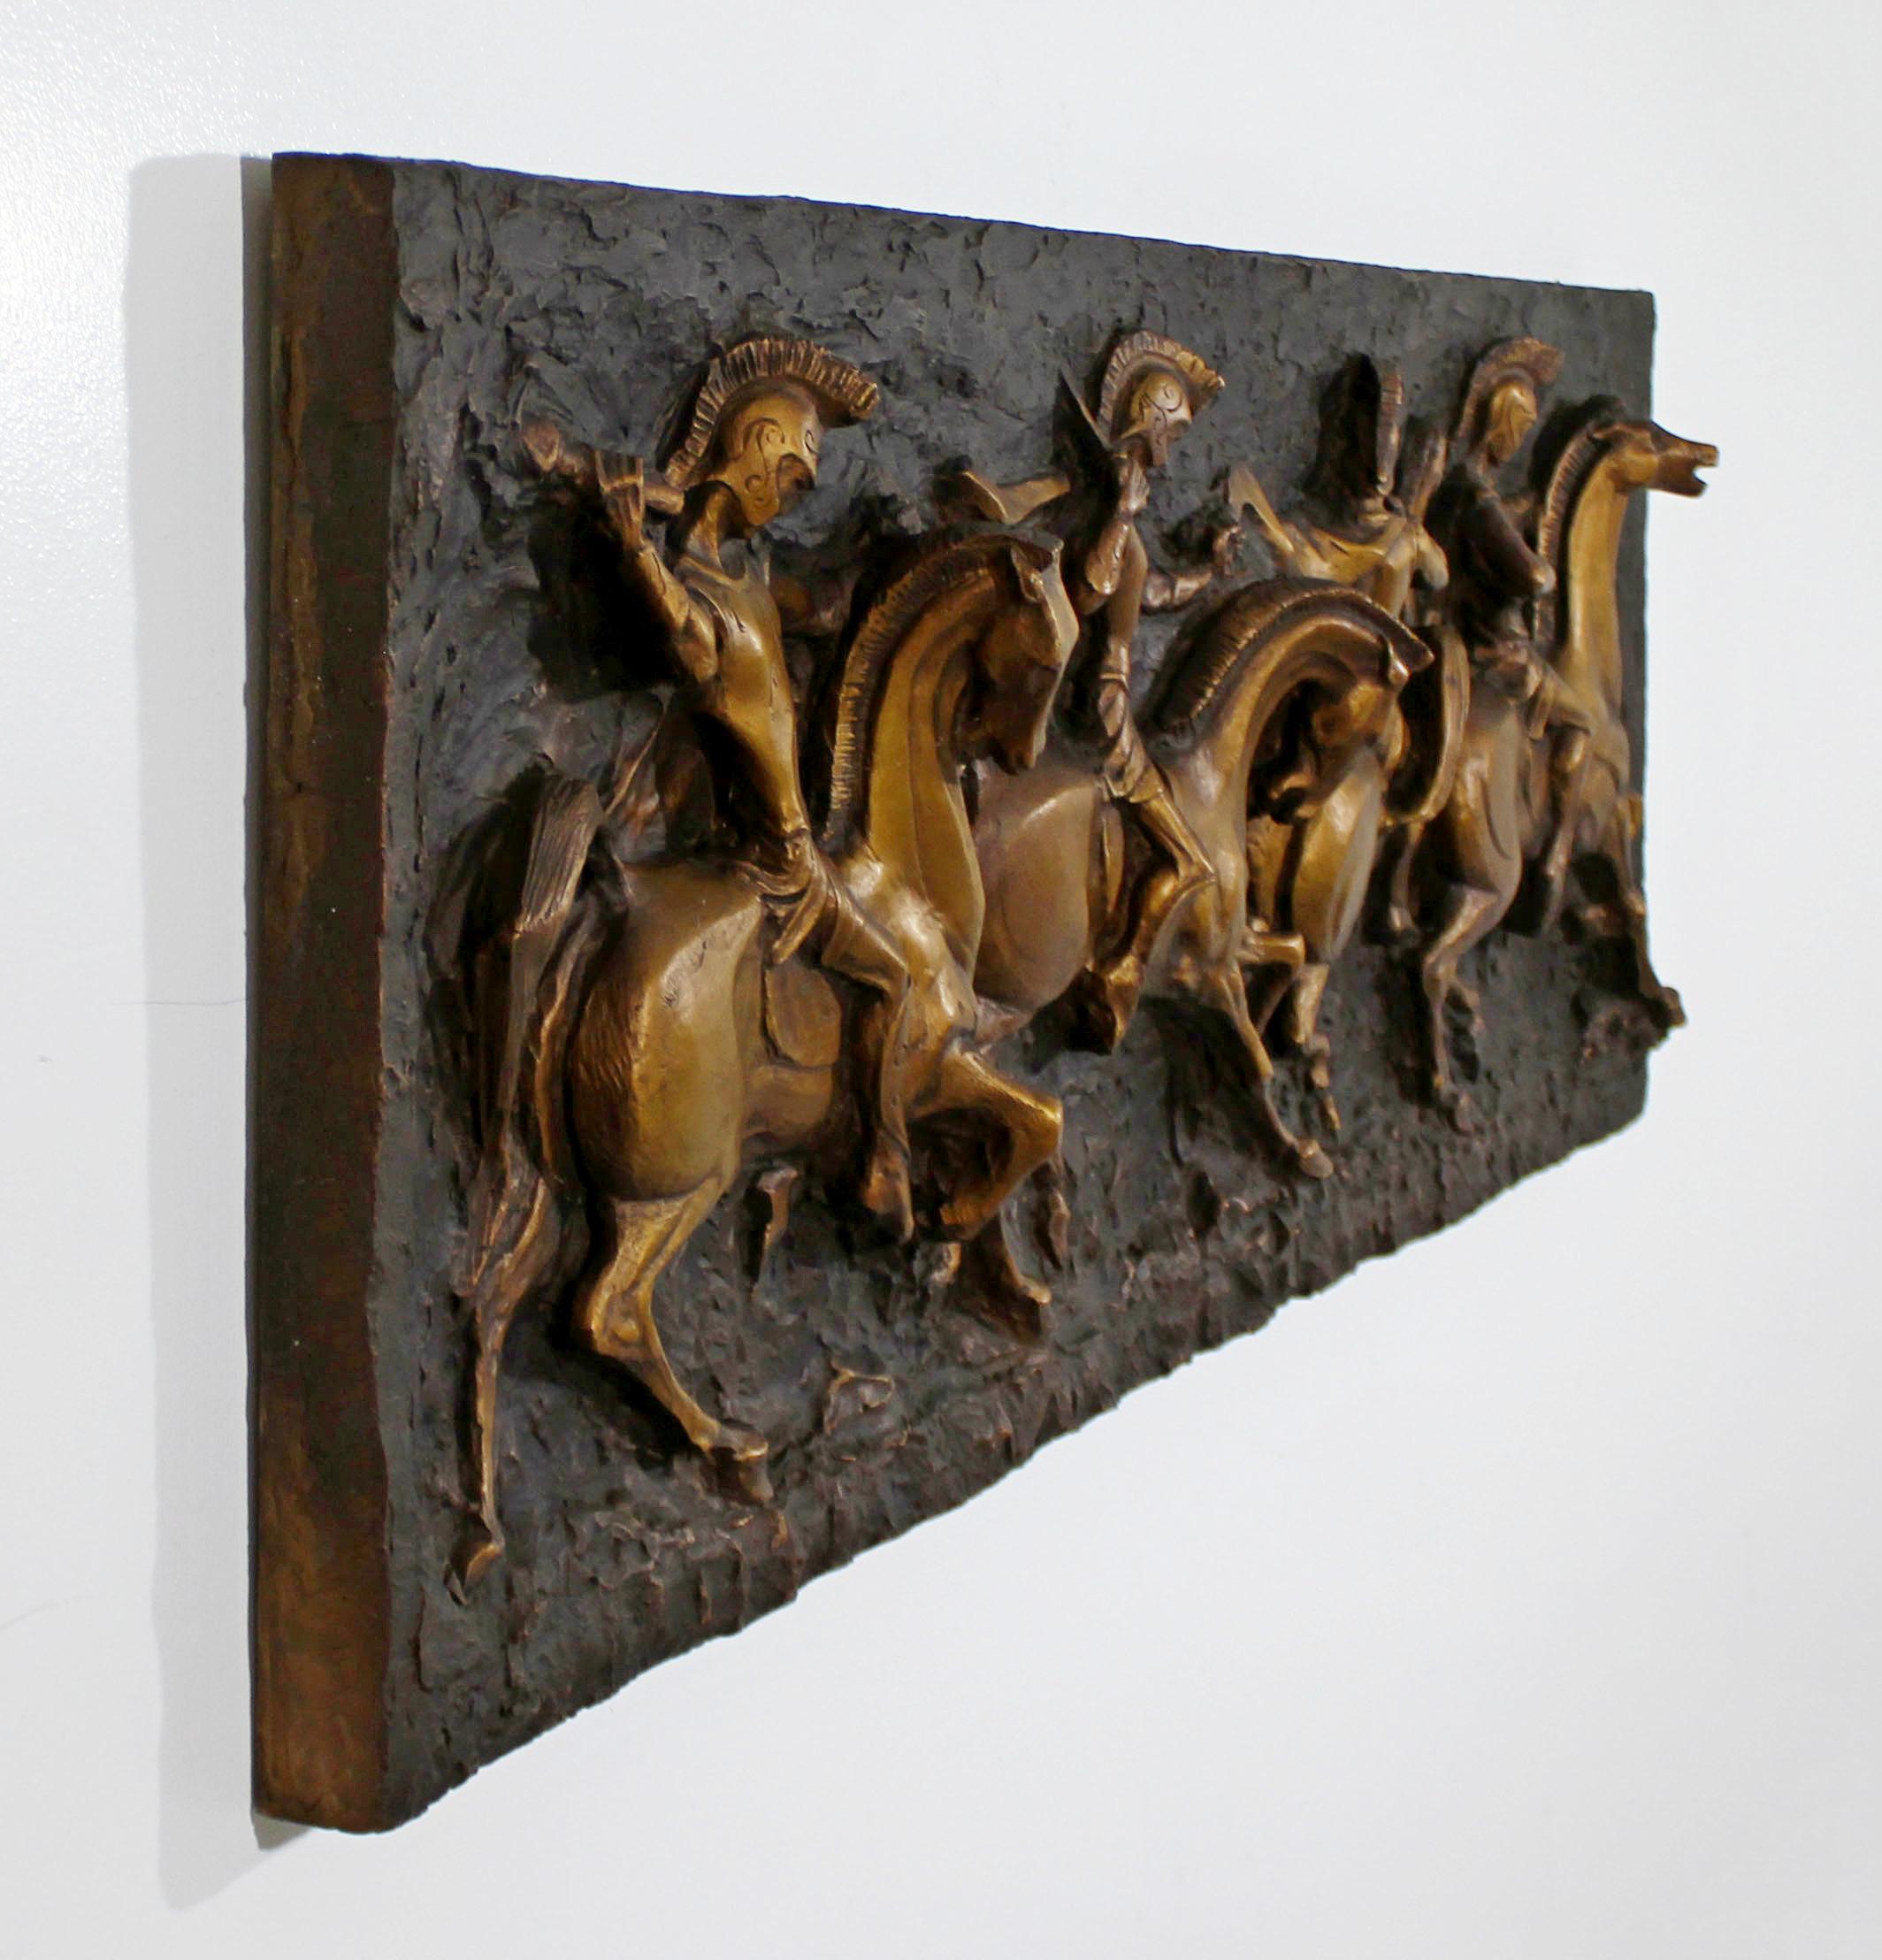 For your consideration is a phenomenal, brass finish fiberglass wall relief sculpture, depicting Roman soldiers, by Finesse Originals, circa 1960s. In excellent vintage condition. The dimensions are 61.5